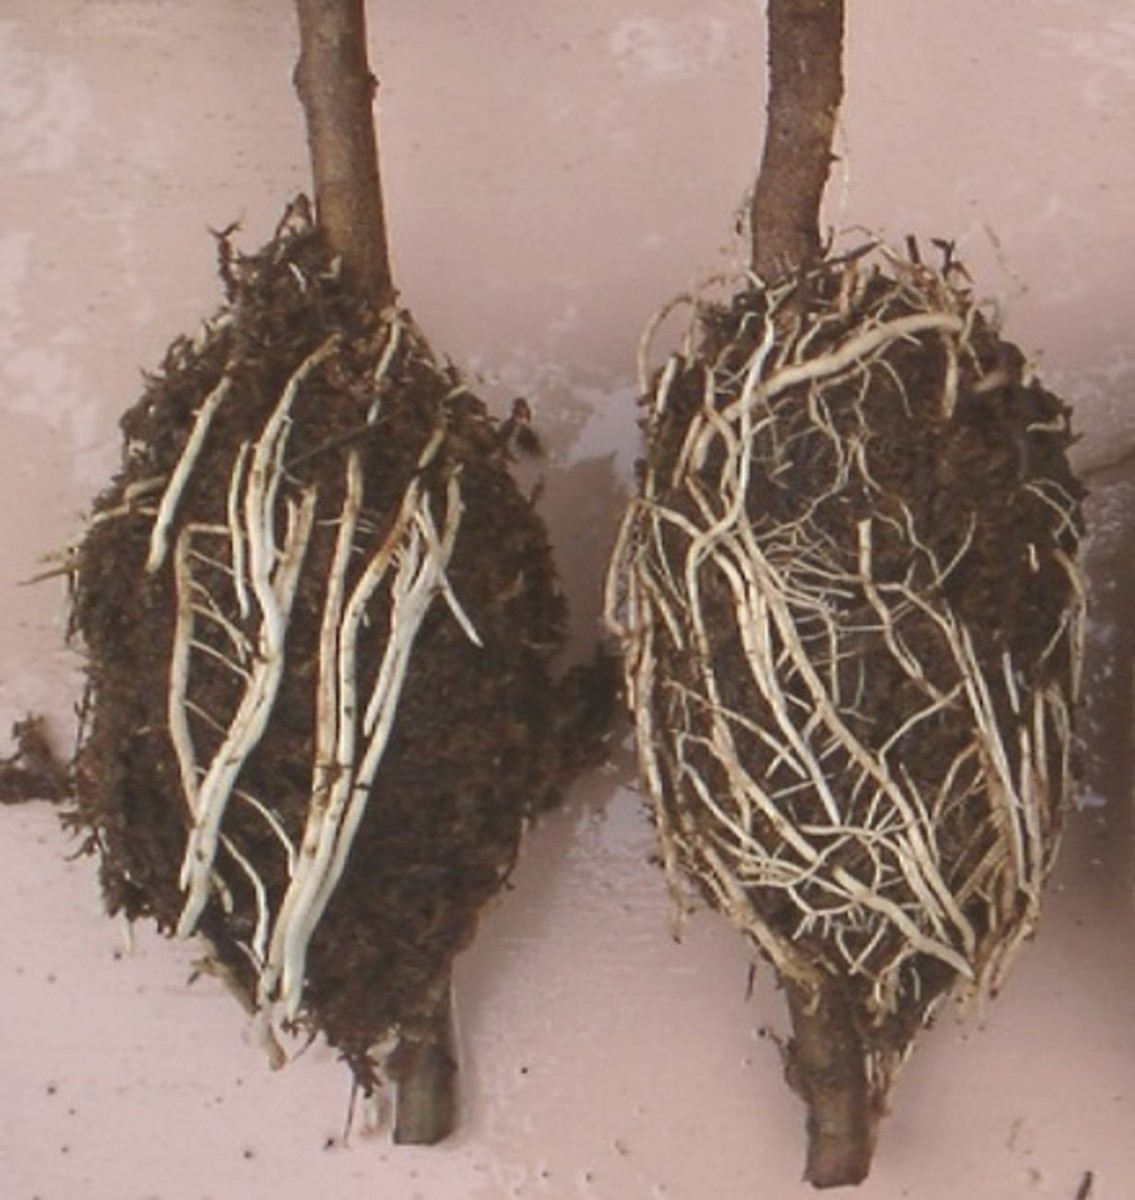 Here's a look at the developed root systems from air layering.